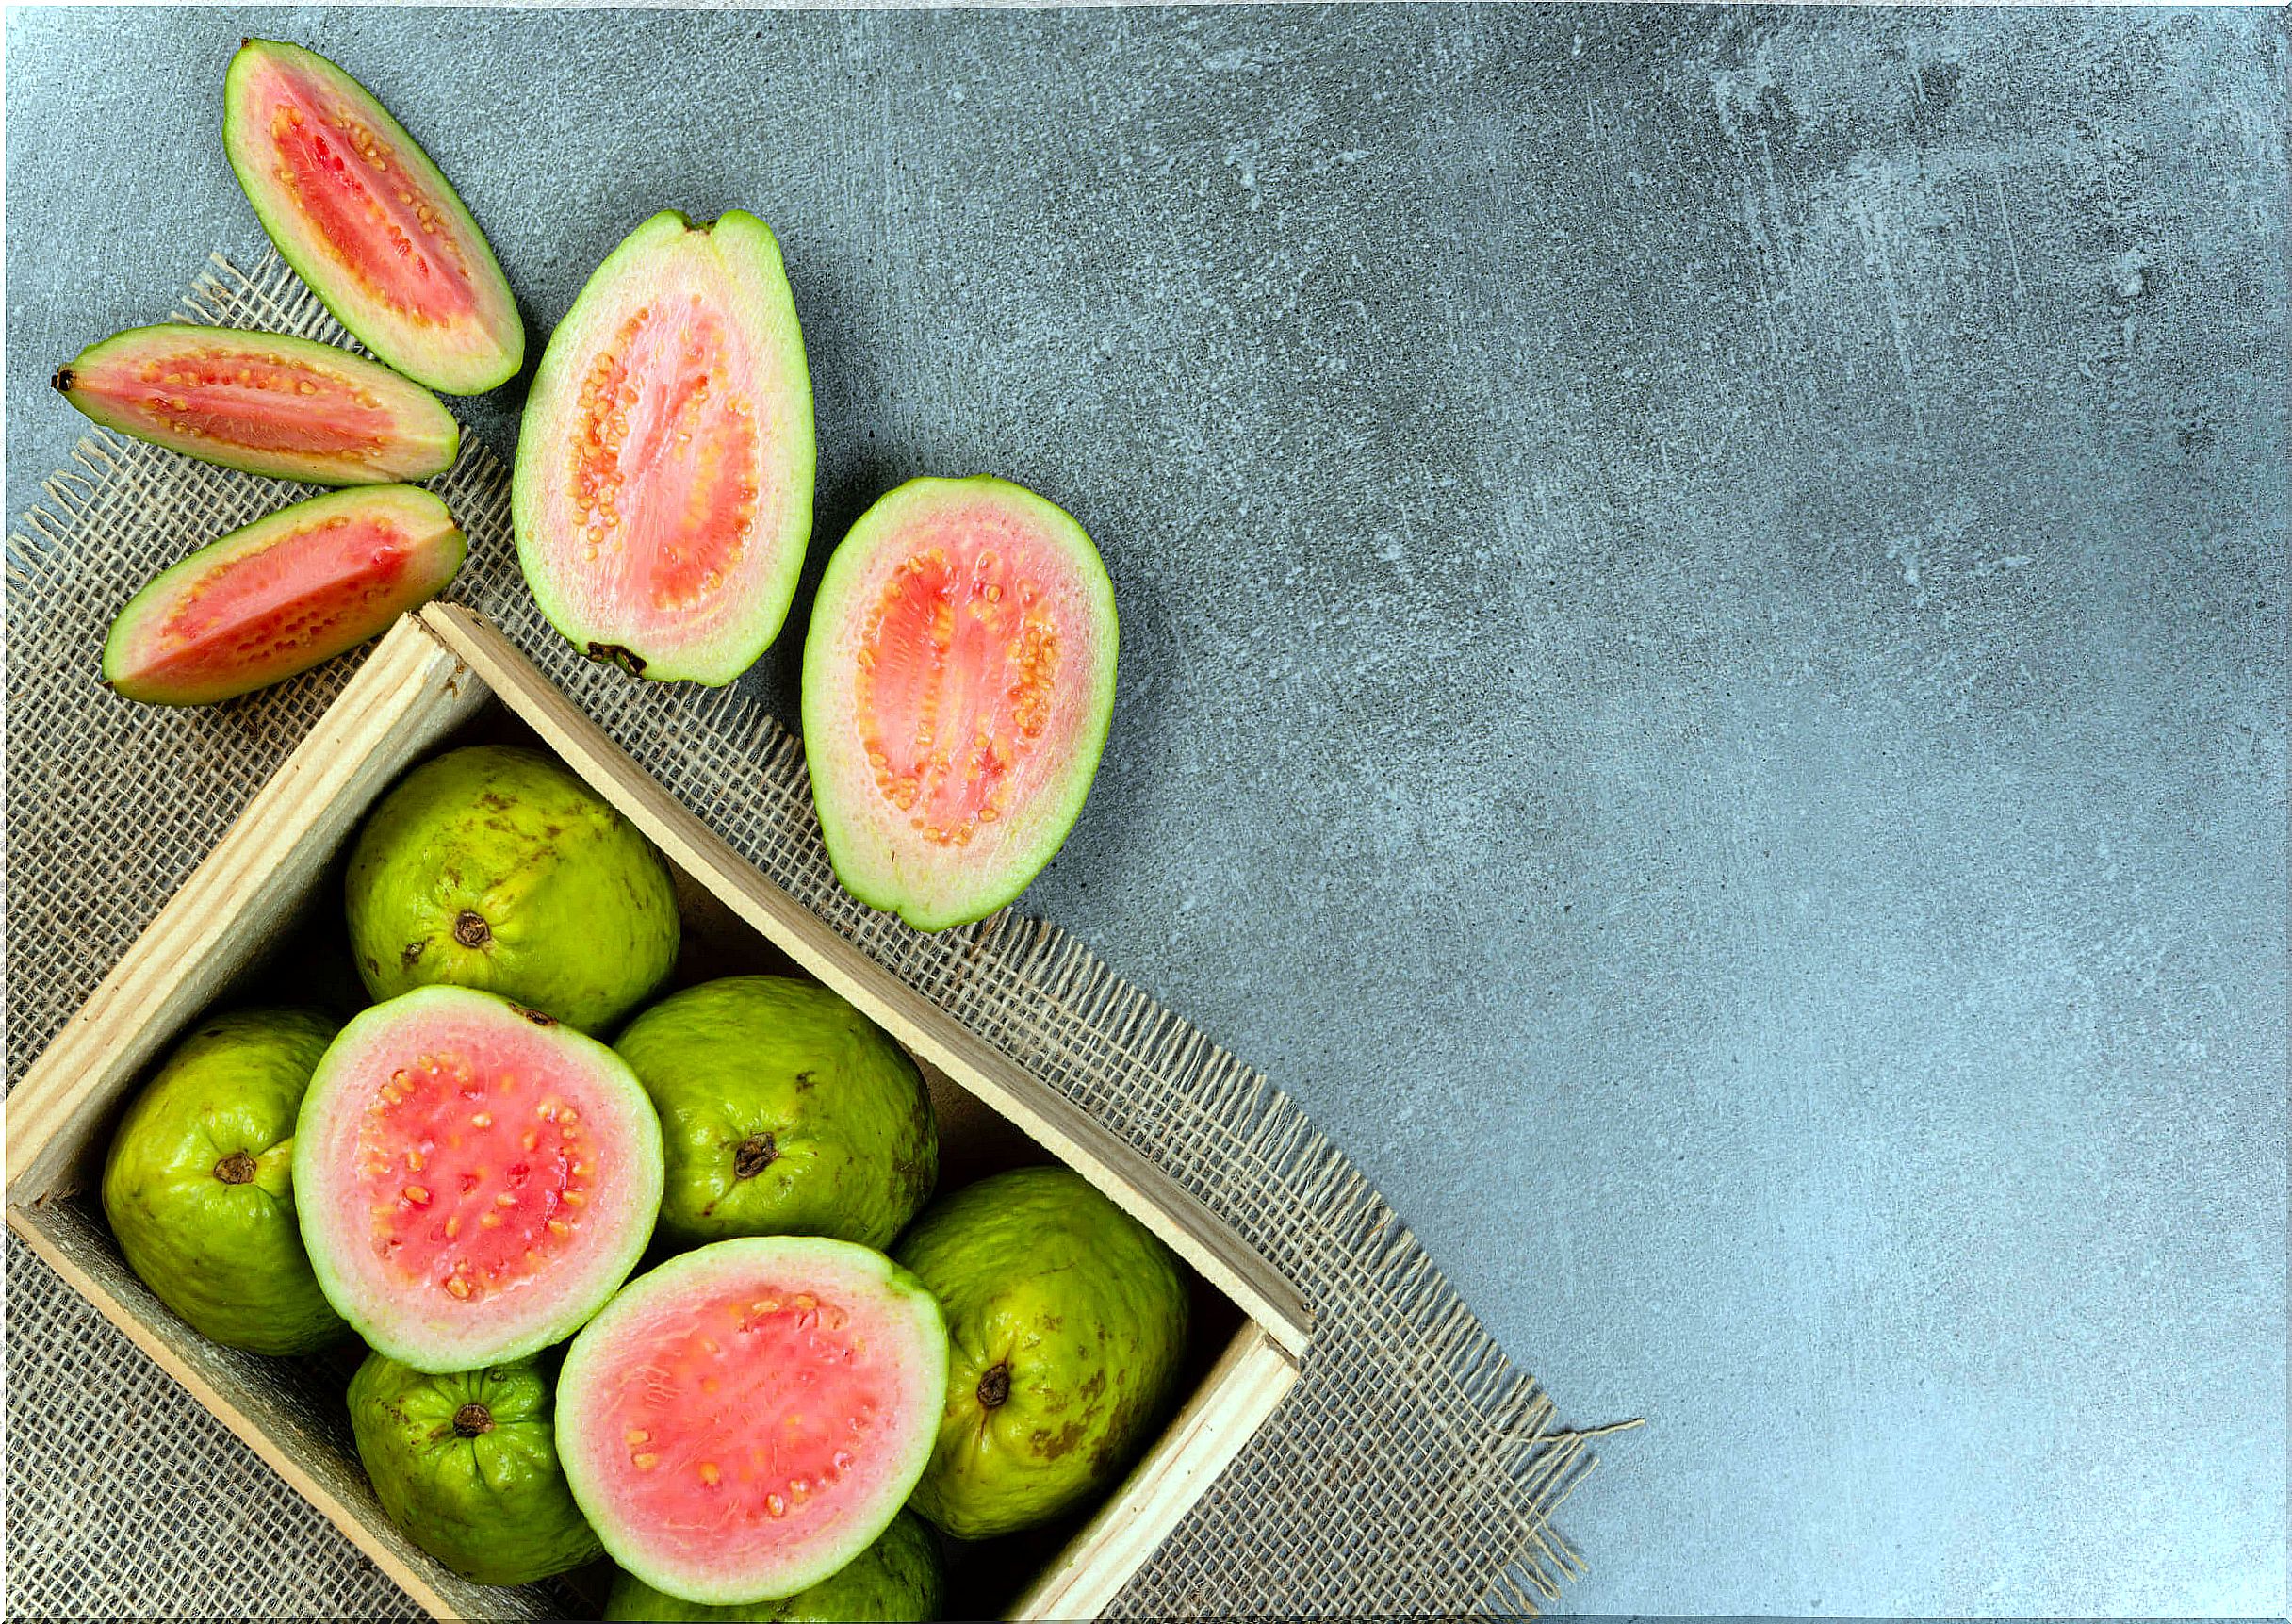 The best antioxidant fruits include guava.